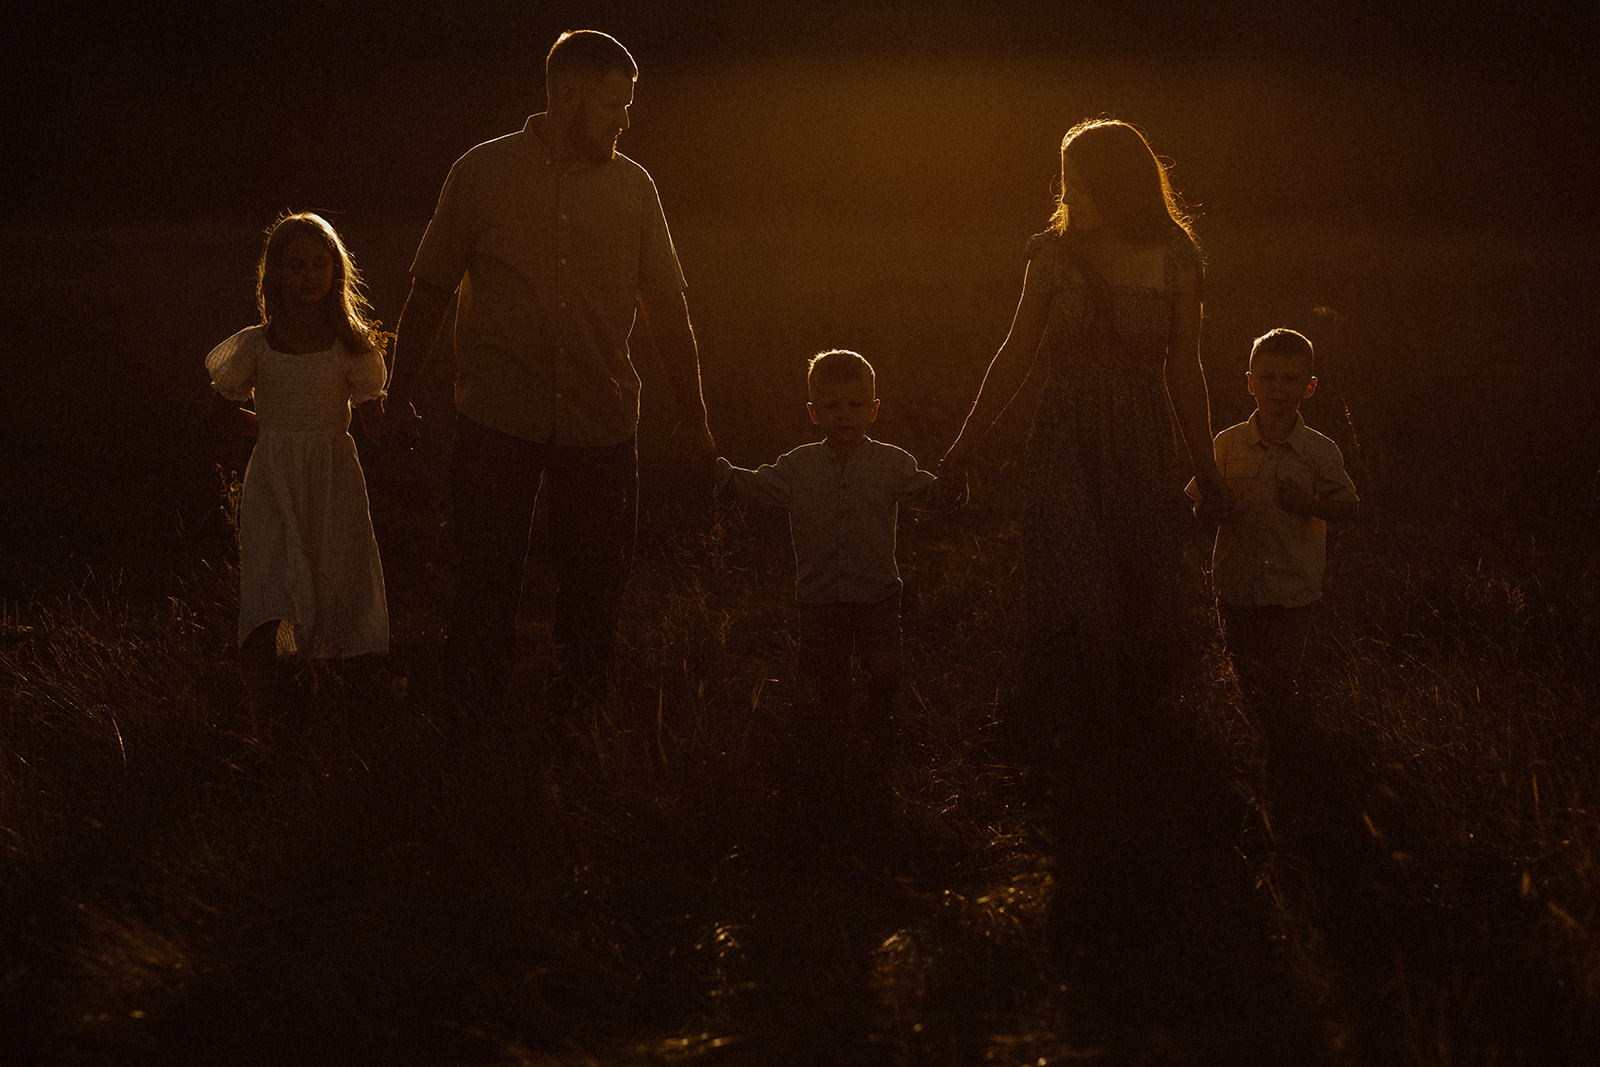 Family walking through a field at sunset